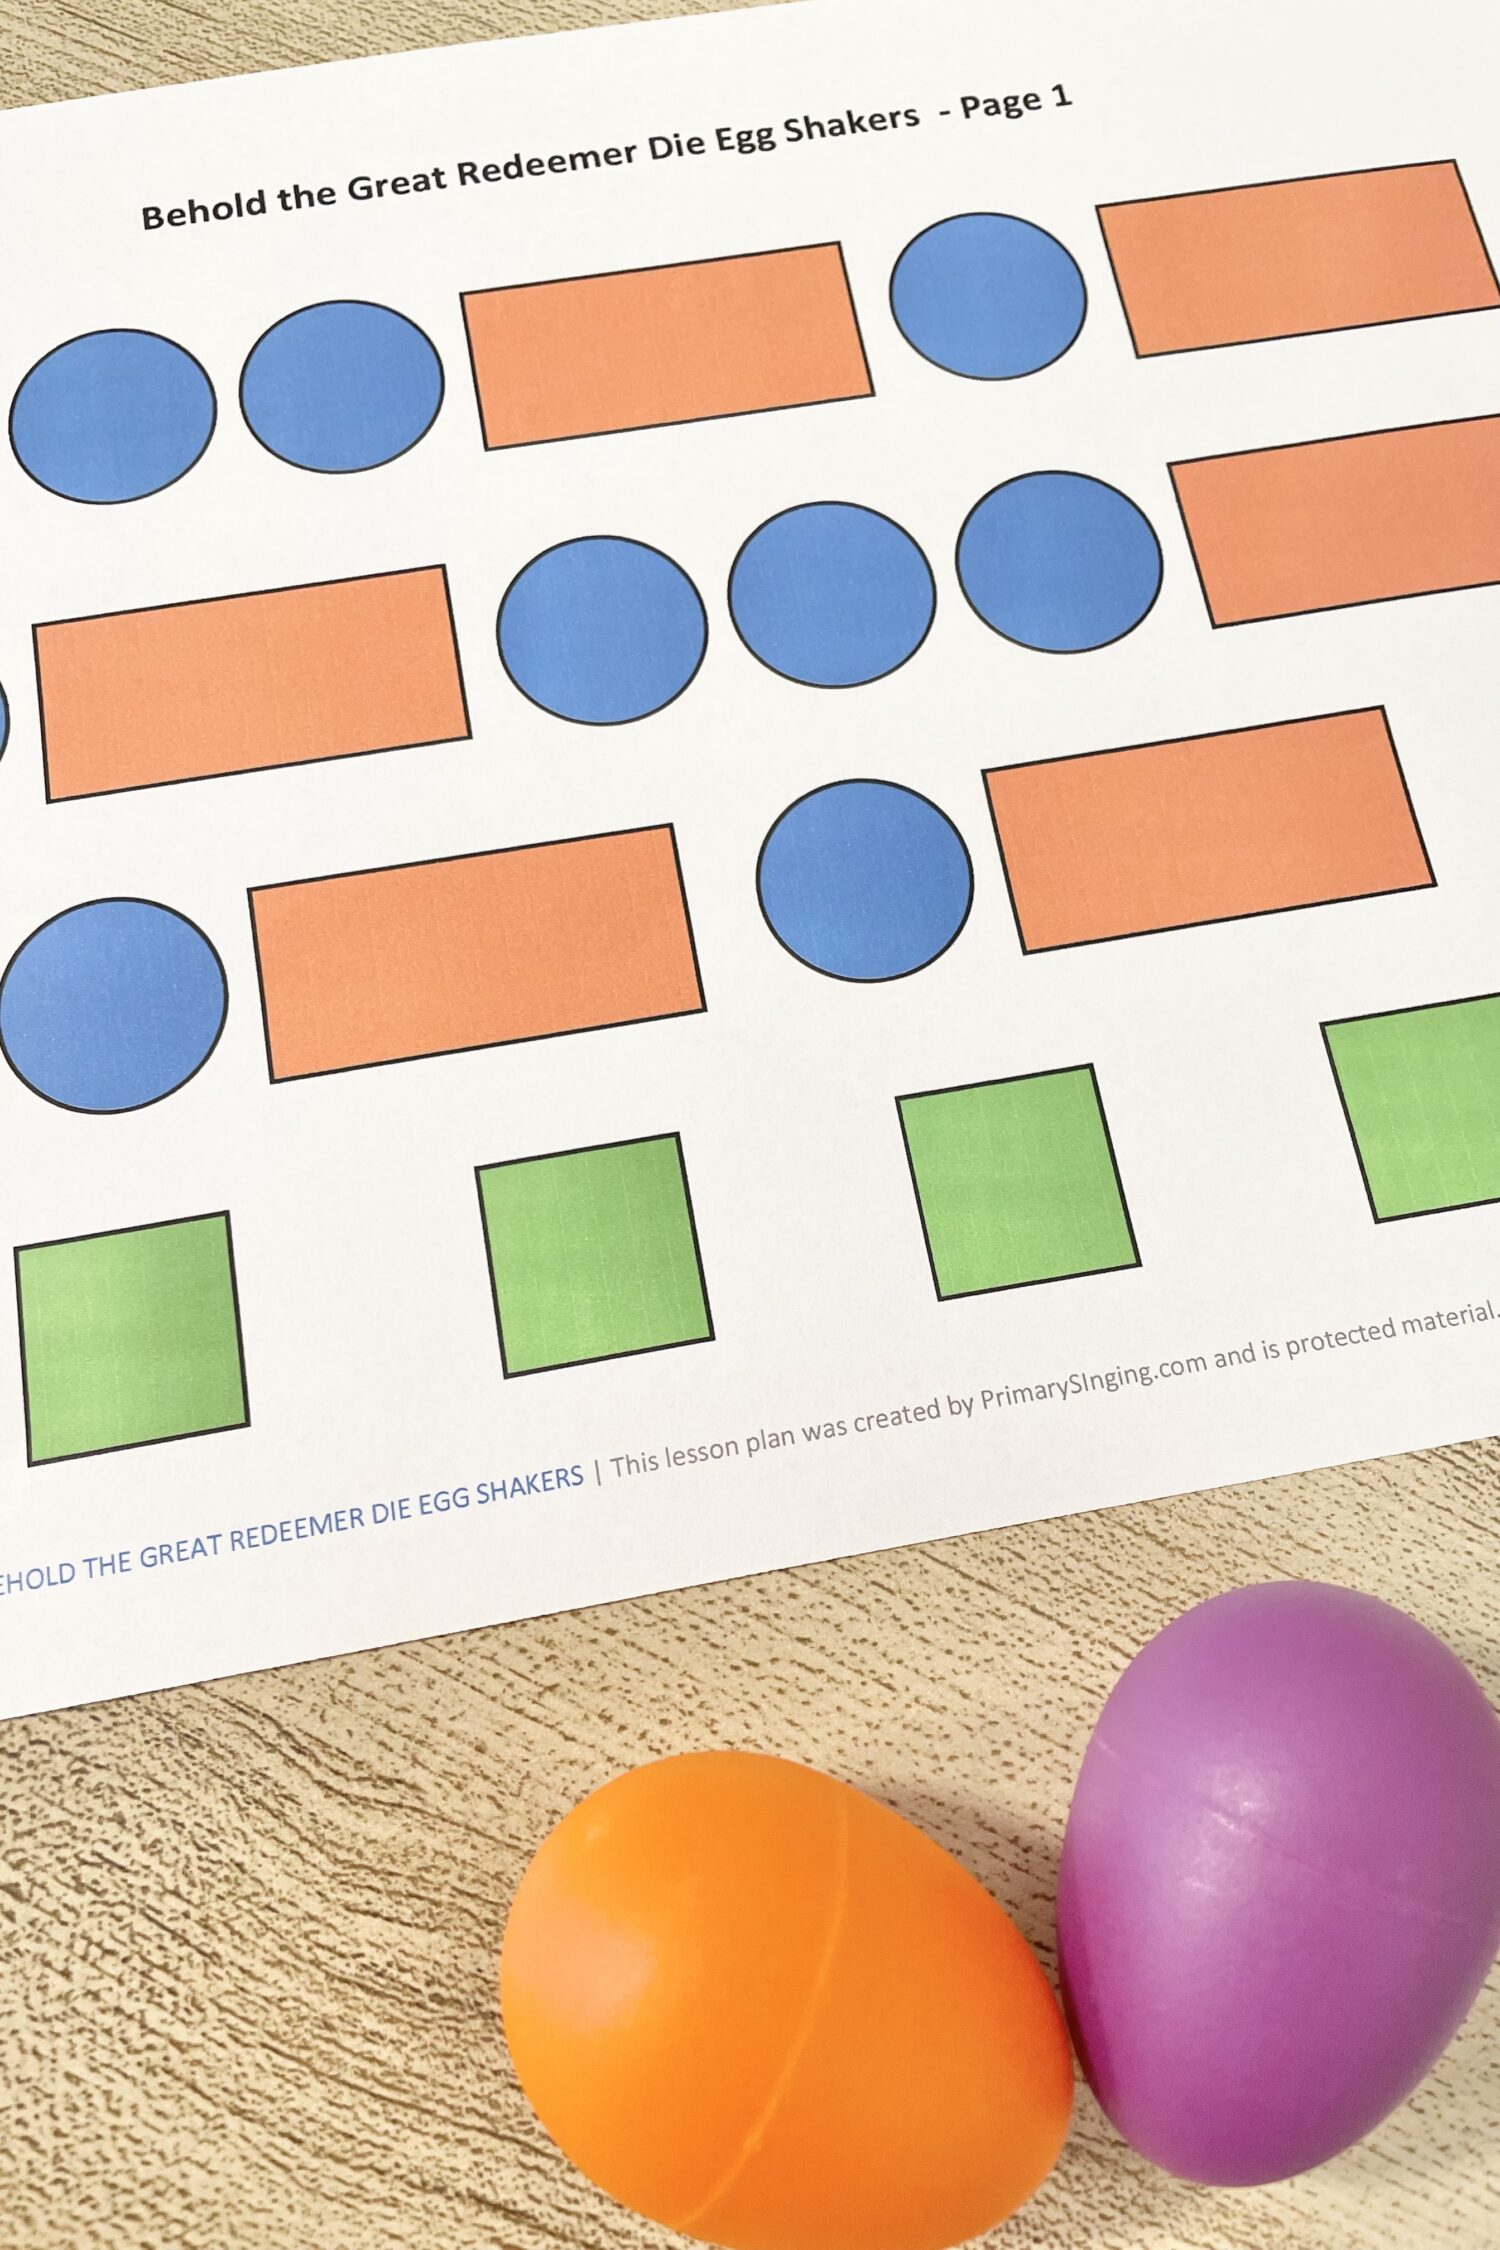 Behold the Great Redeemer Die Egg Shakers! Use this egg shaker pattern with 3 rhythms to review this Come Follow Me New Testament song for LDS Primary Music Leaders.